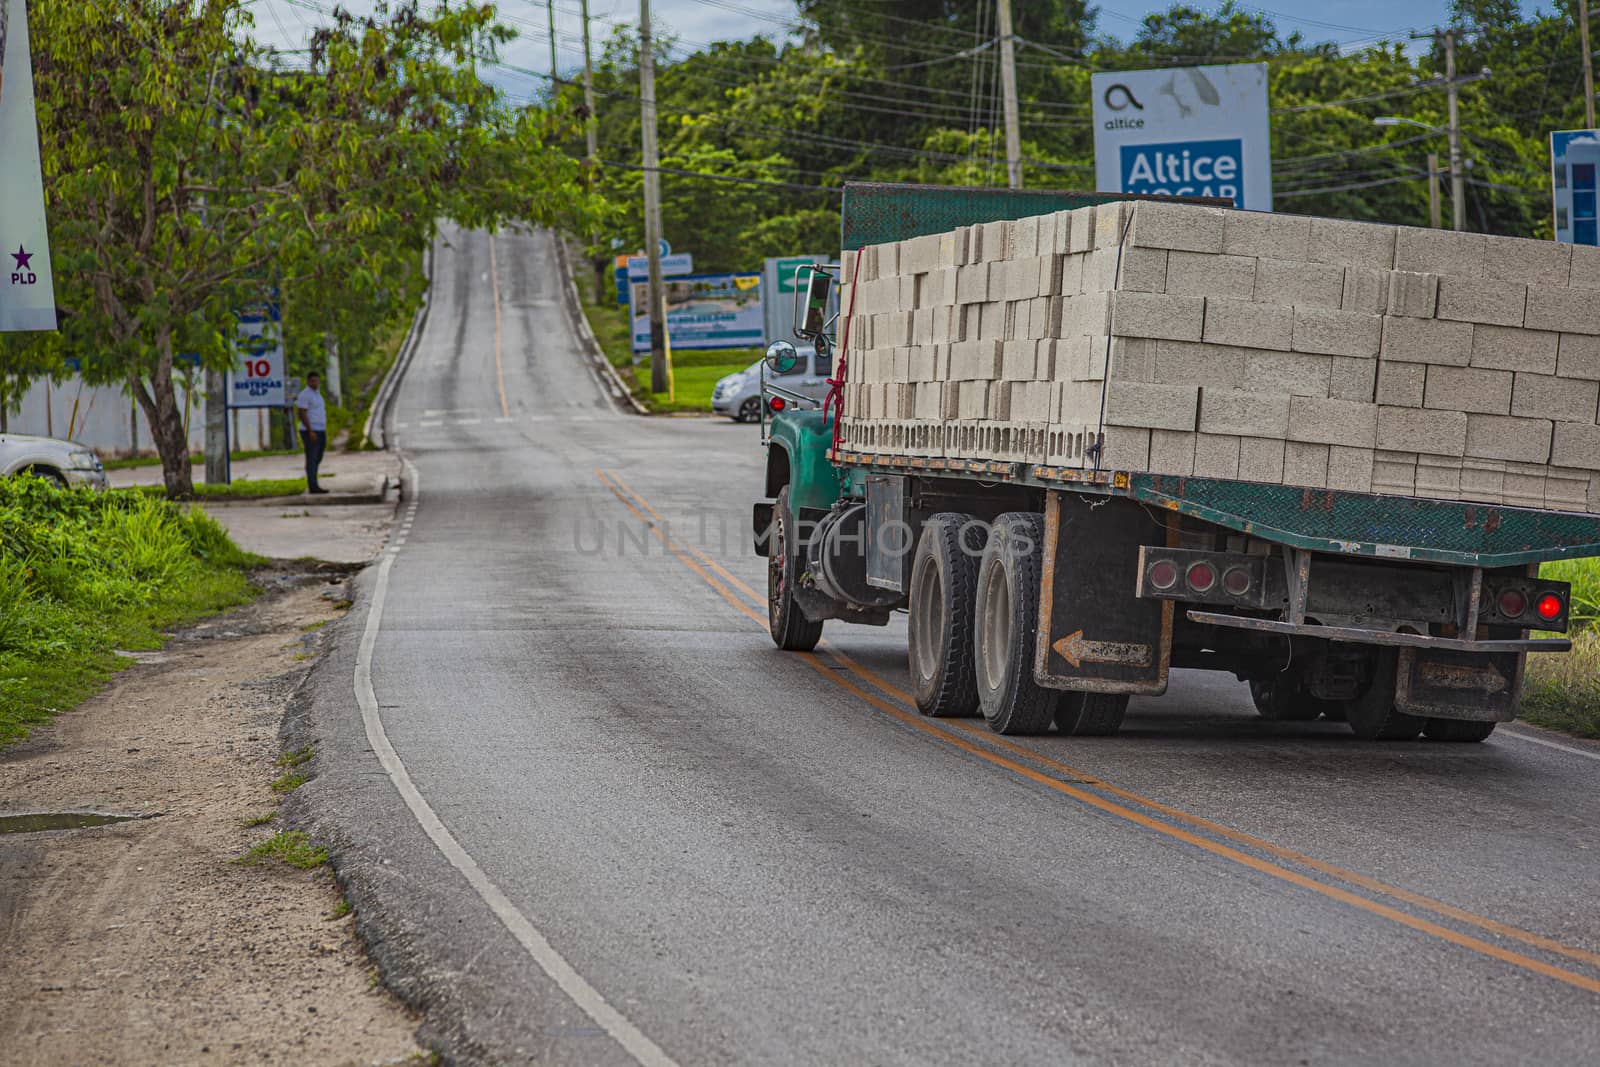 BAYAHIBE, DOMINICAN REPUBLIC 26 JANUARY 2020: Old truck on the road